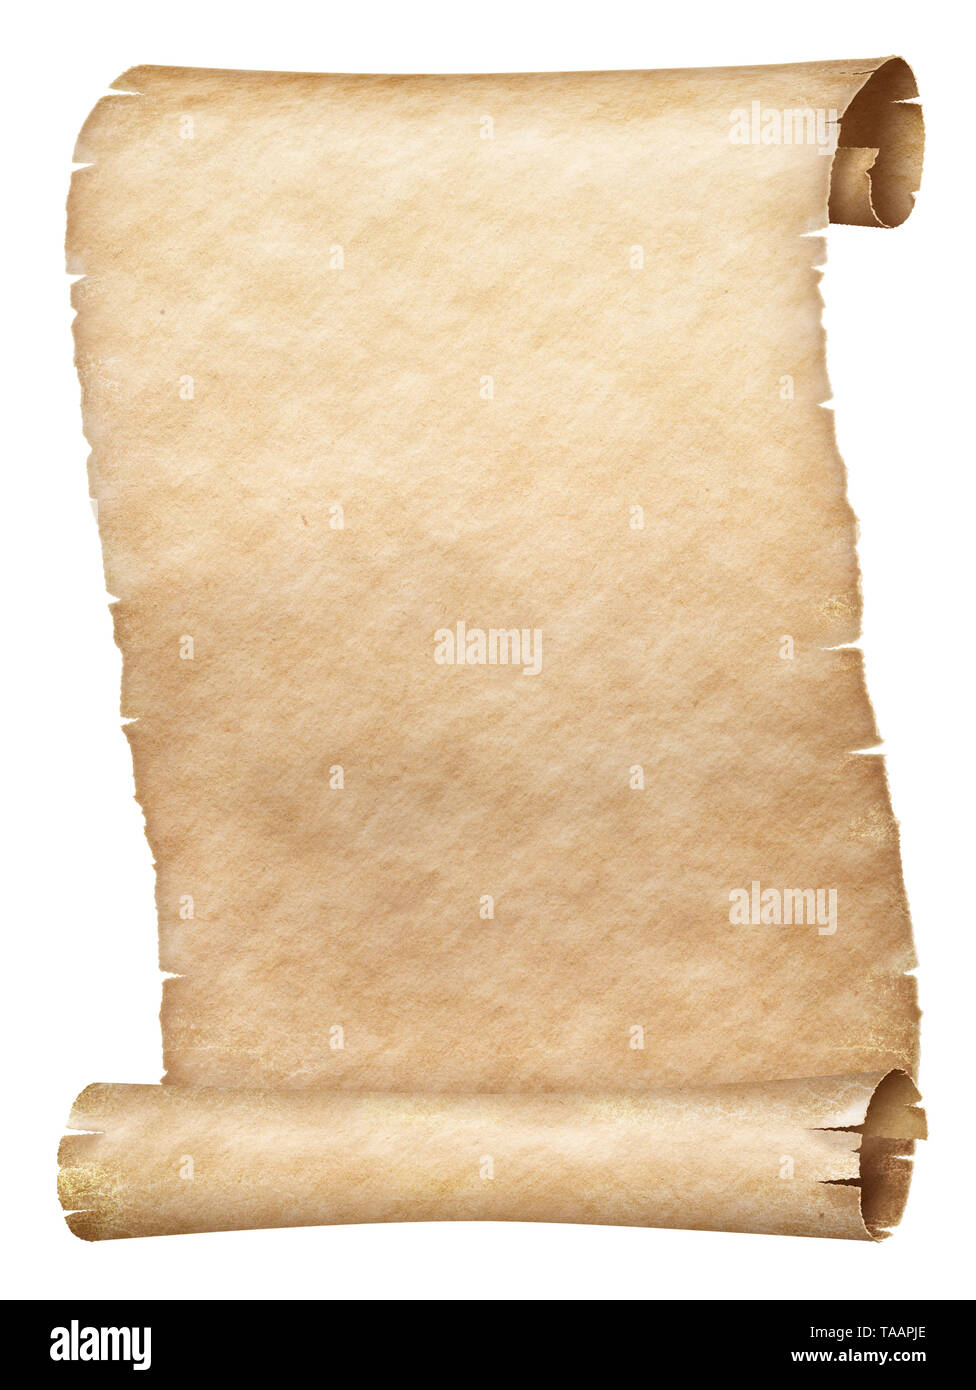 https://c8.alamy.com/comp/TAAPJE/ancient-parchment-scroll-isolated-on-white-TAAPJE.jpg